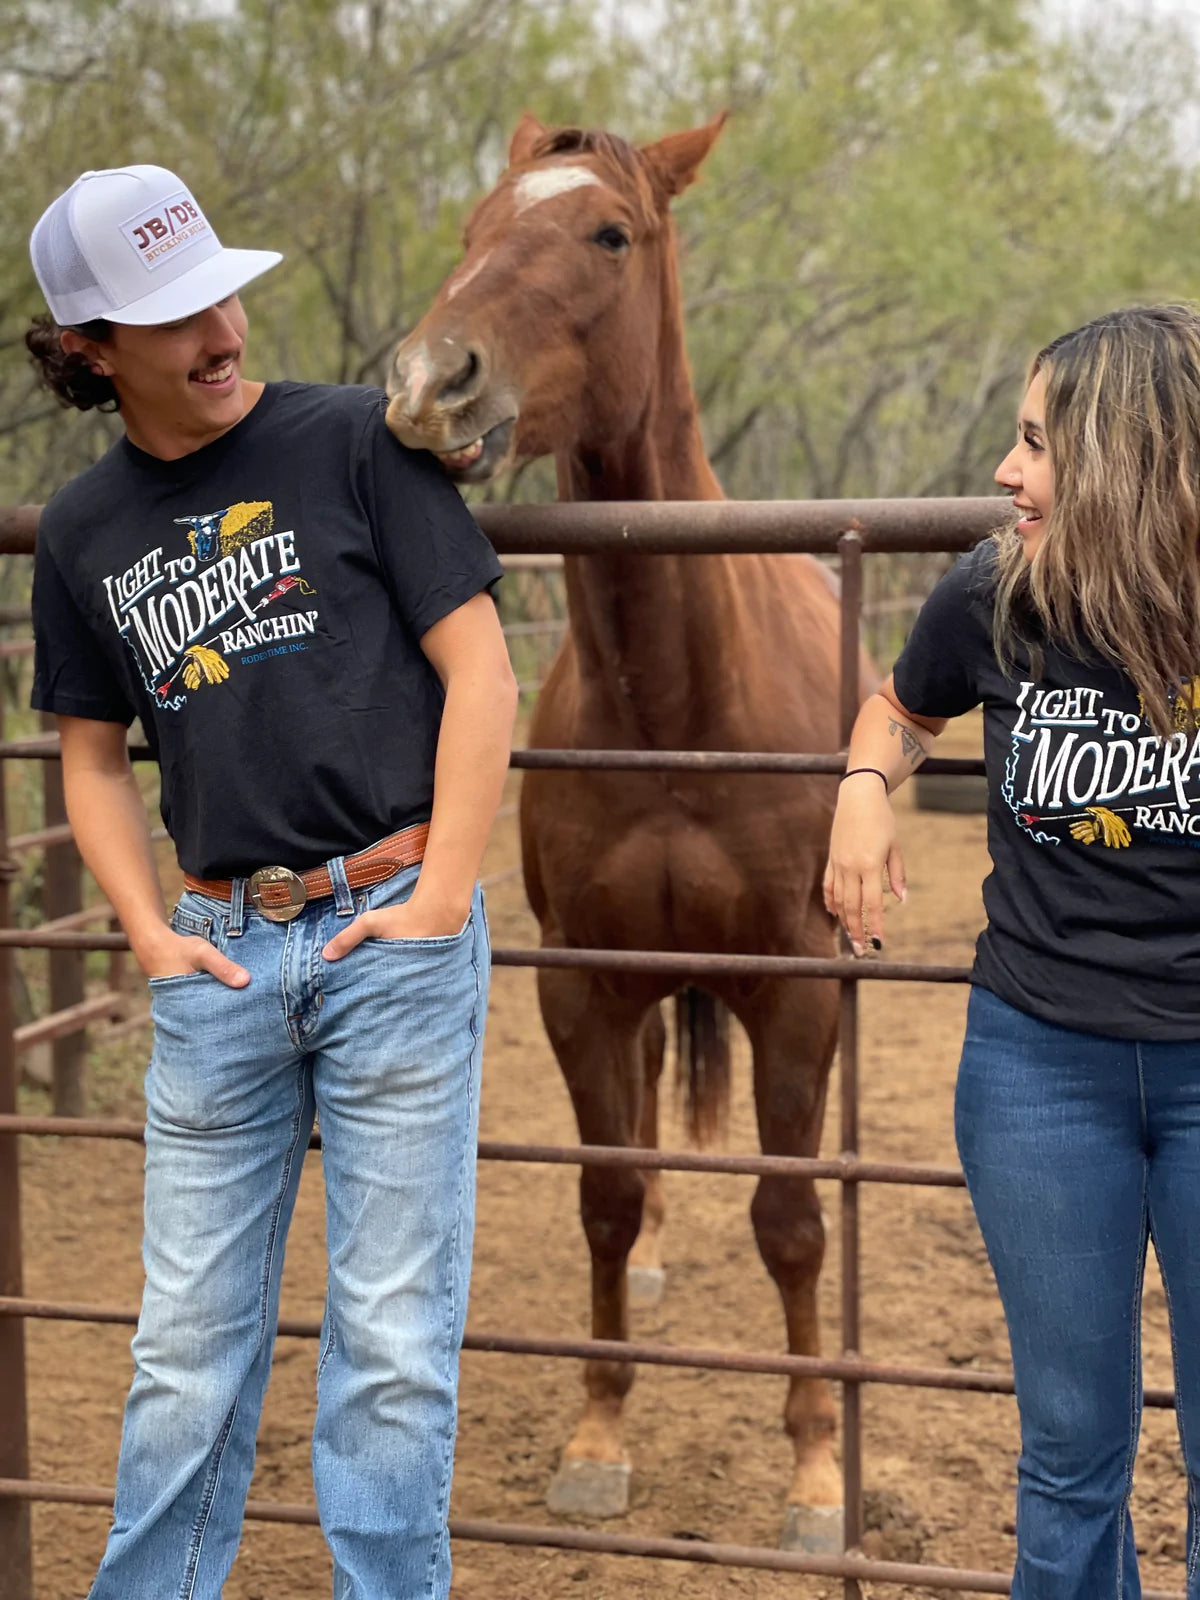 Rodeo Time Light to Moderate Ranchin' Tee